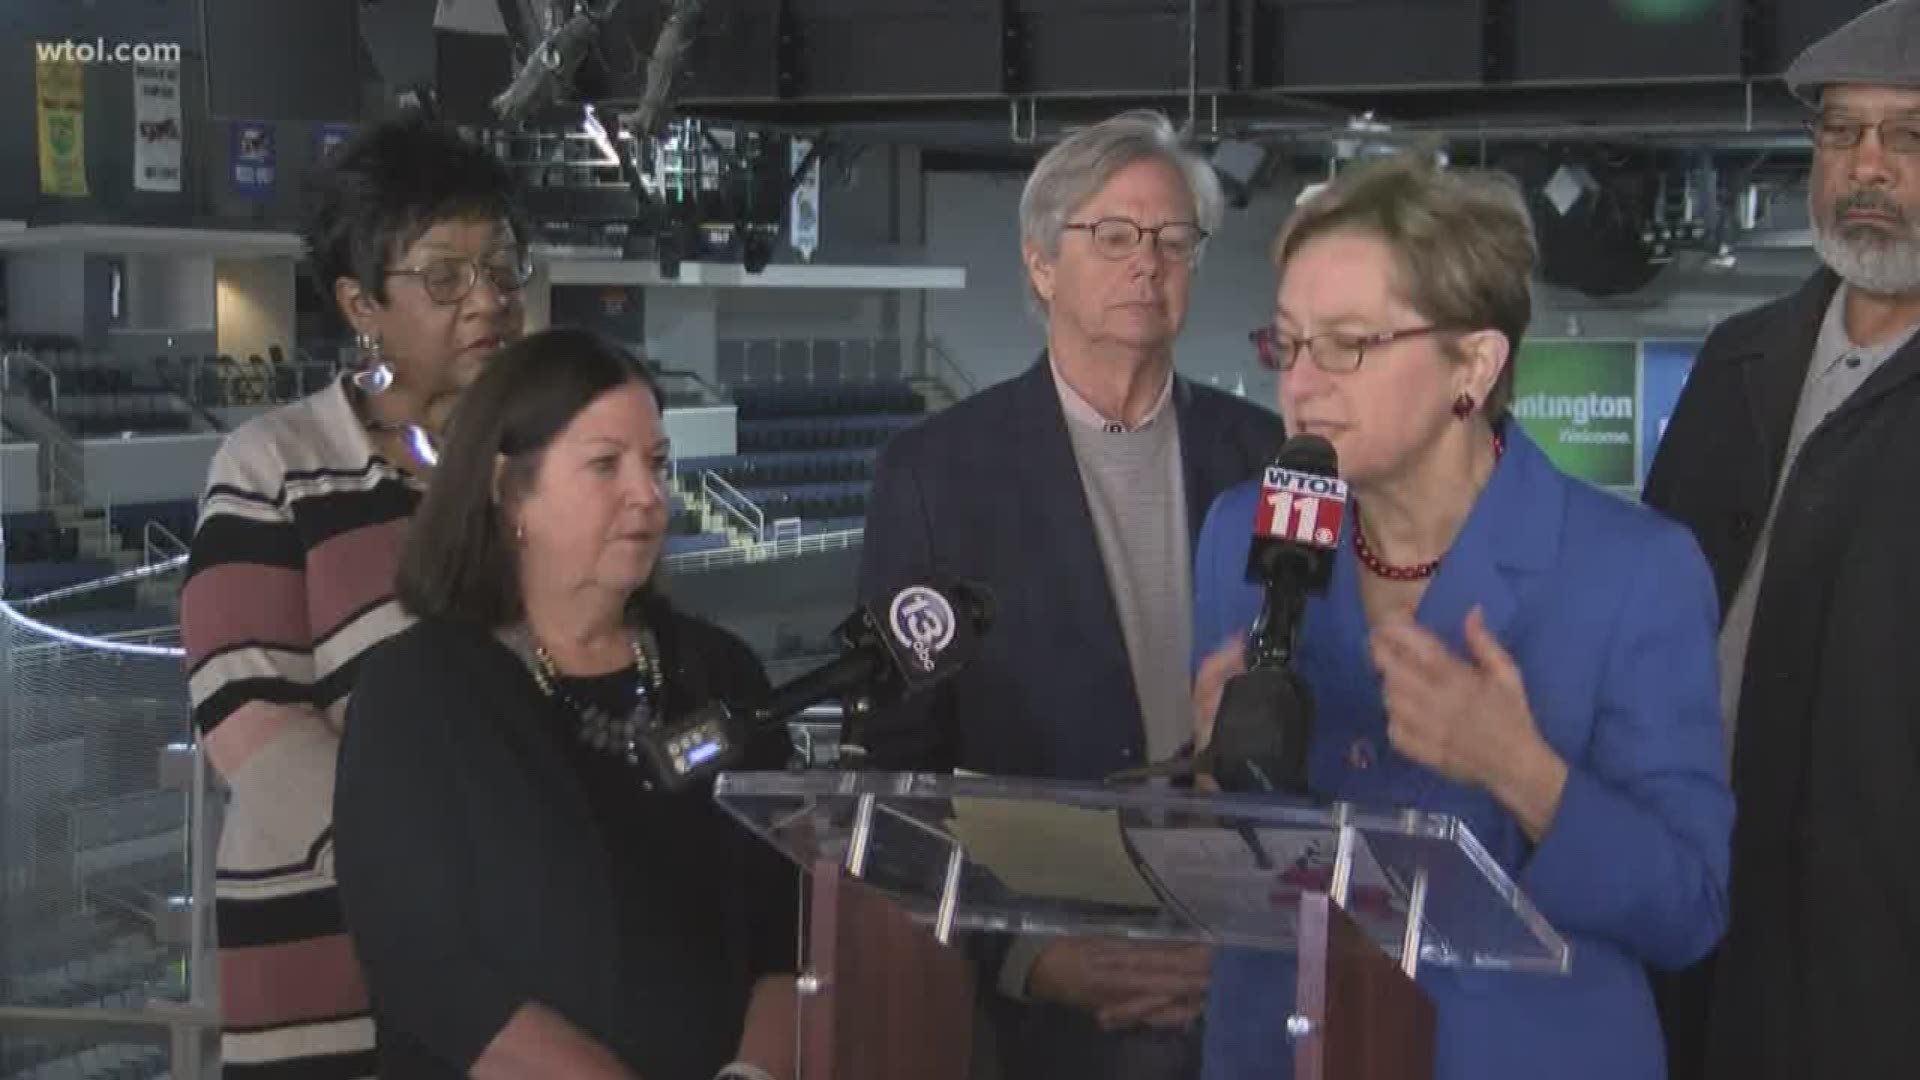 Congresswoman Kaptur and Lucas County Democrats call for respect and civility as President Trump rallies in Toledo on Jan. 9.